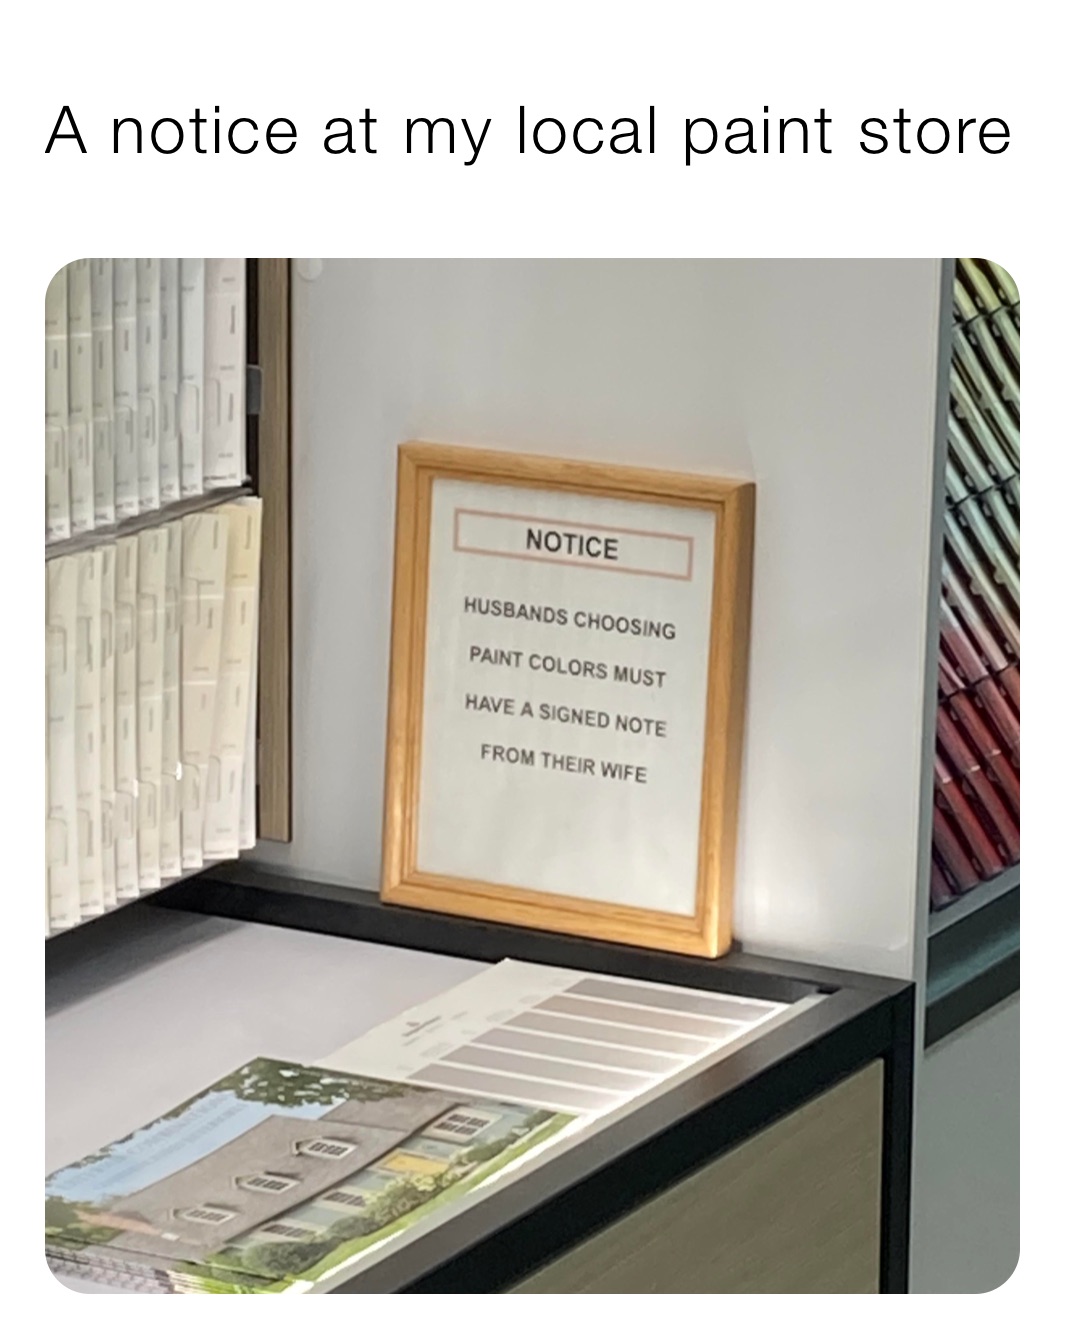 A notice at my local paint store